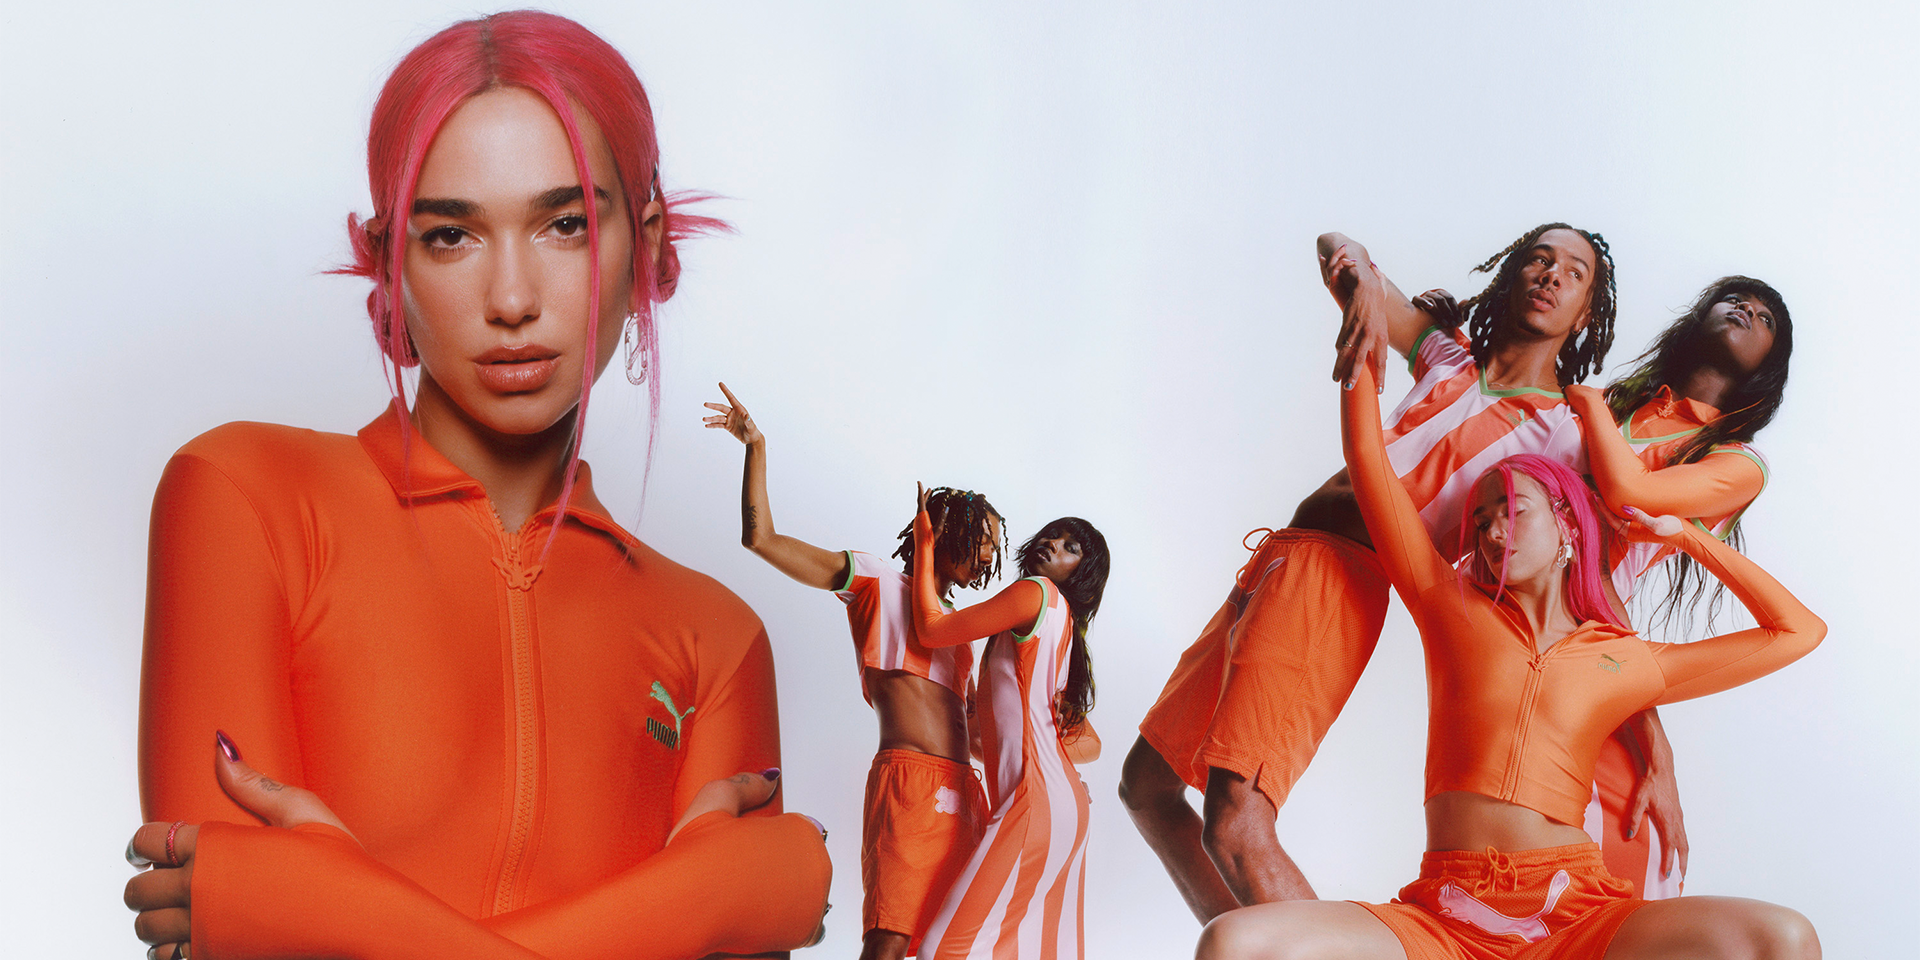 PUMA and global pop superstar Dua Lipa present the second installation of their ongoing Flutur collaboration.